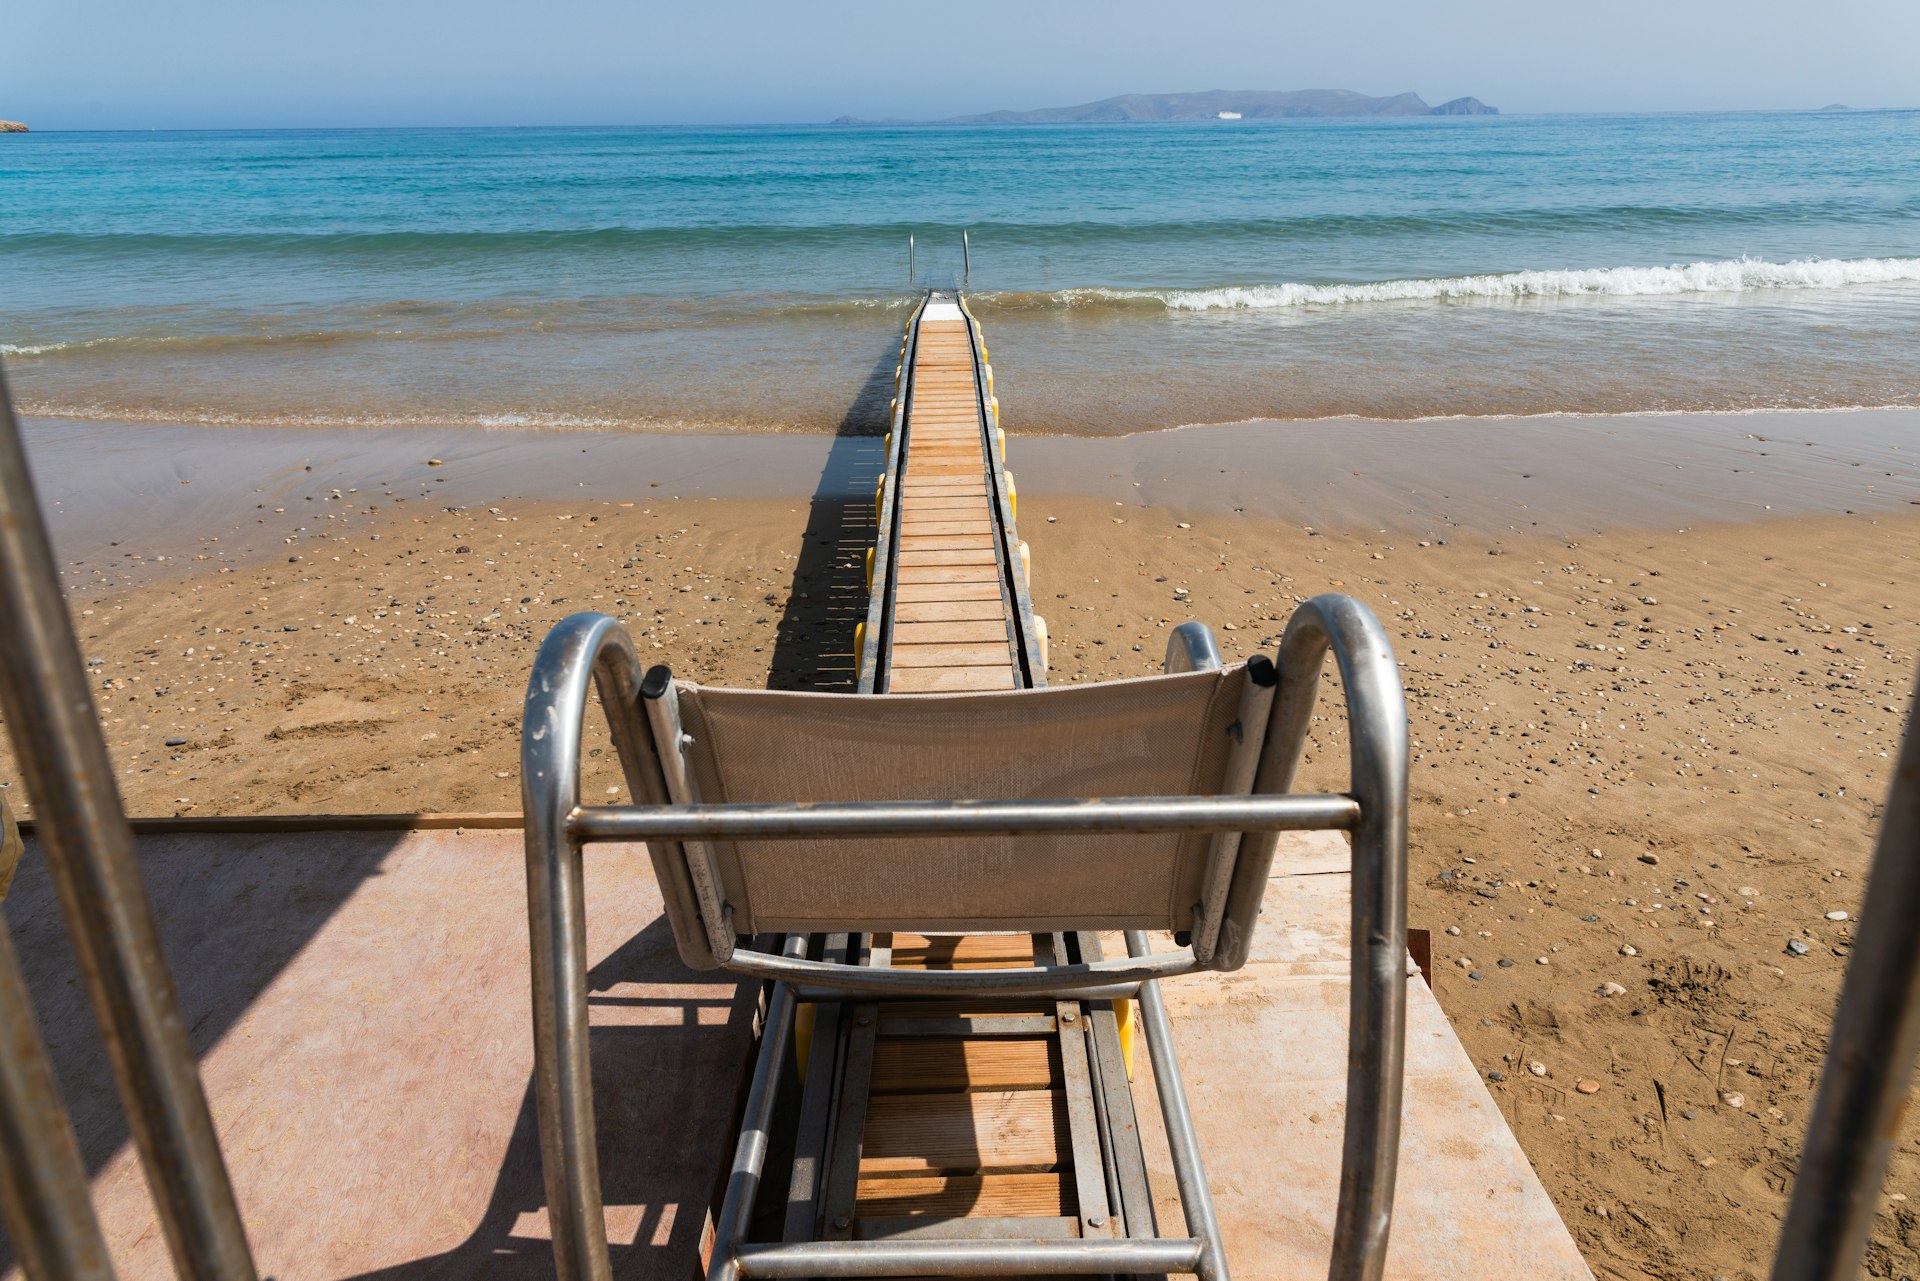 A ramp for wheelchairs leads to the water at a beach in Heraklion, Crete, Greece